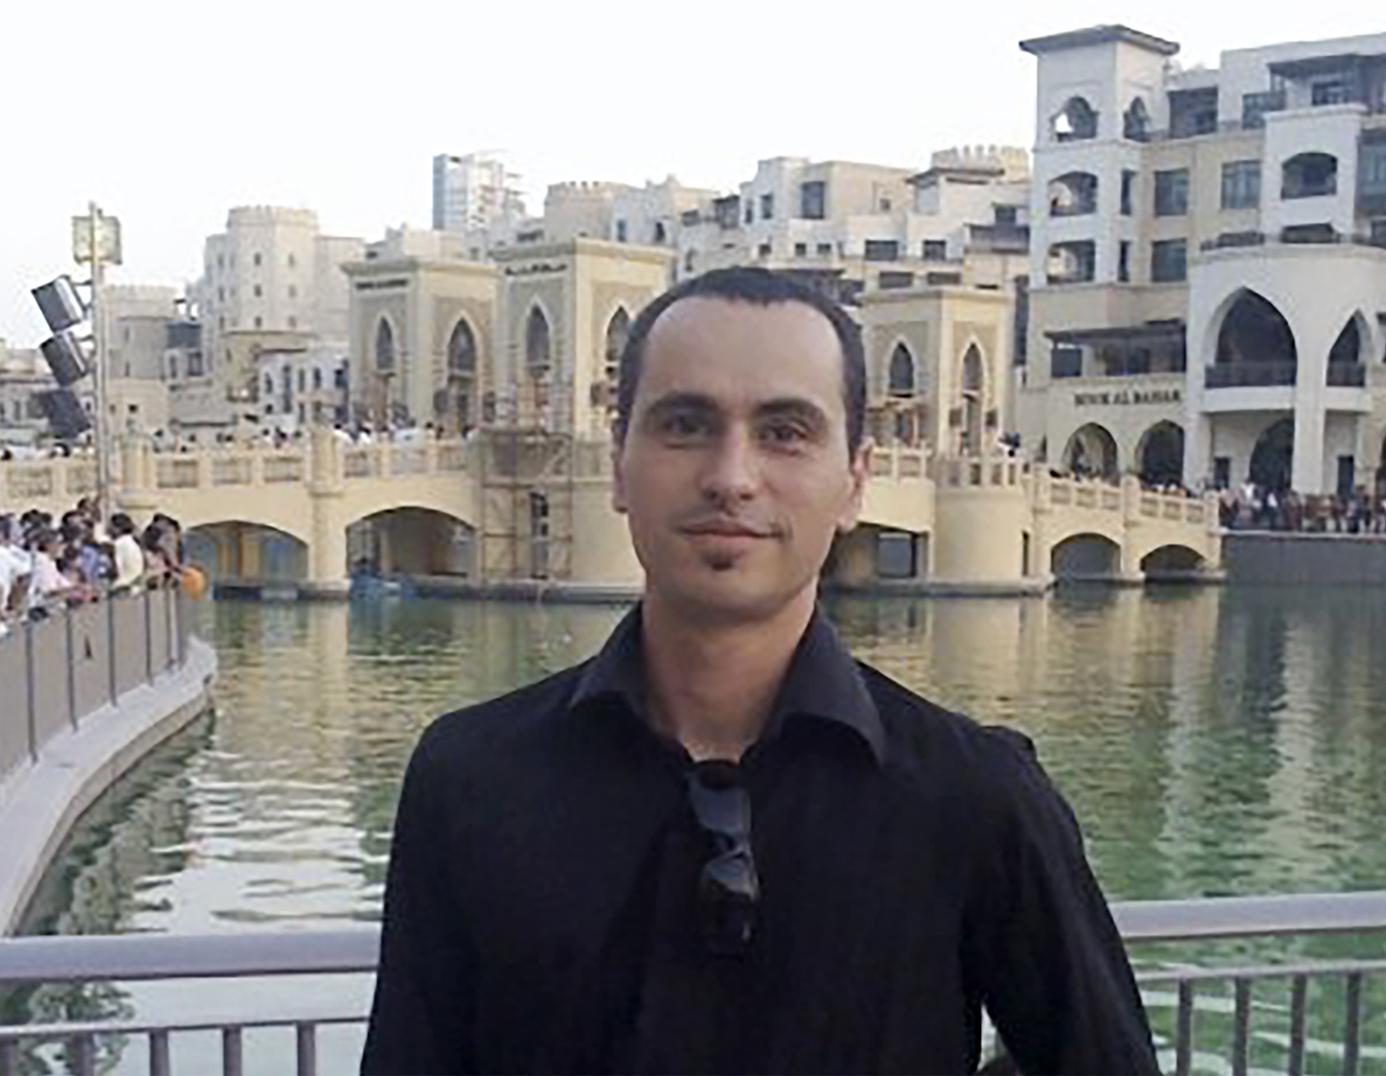 Scott Richards, pictured in Dubai, has been detained for highlighting the work of an Afghan refugee charity